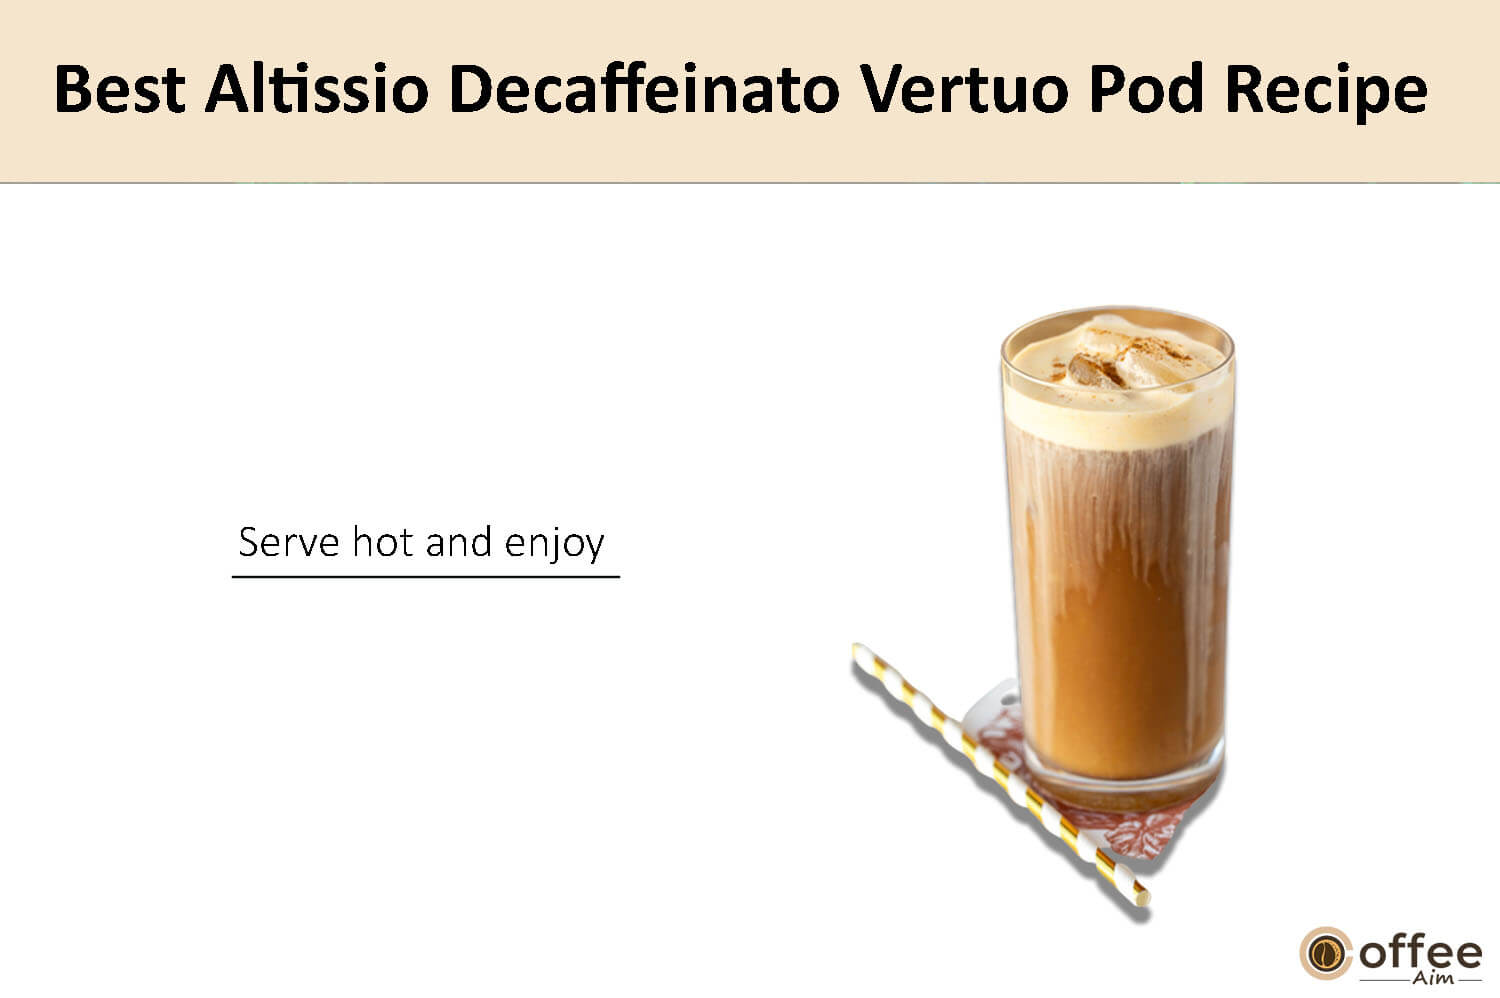 In this image, I clarify the preparation instructions for crafting the finest Altissio Decaffeinato Nespresso Vertuo coffee pod.